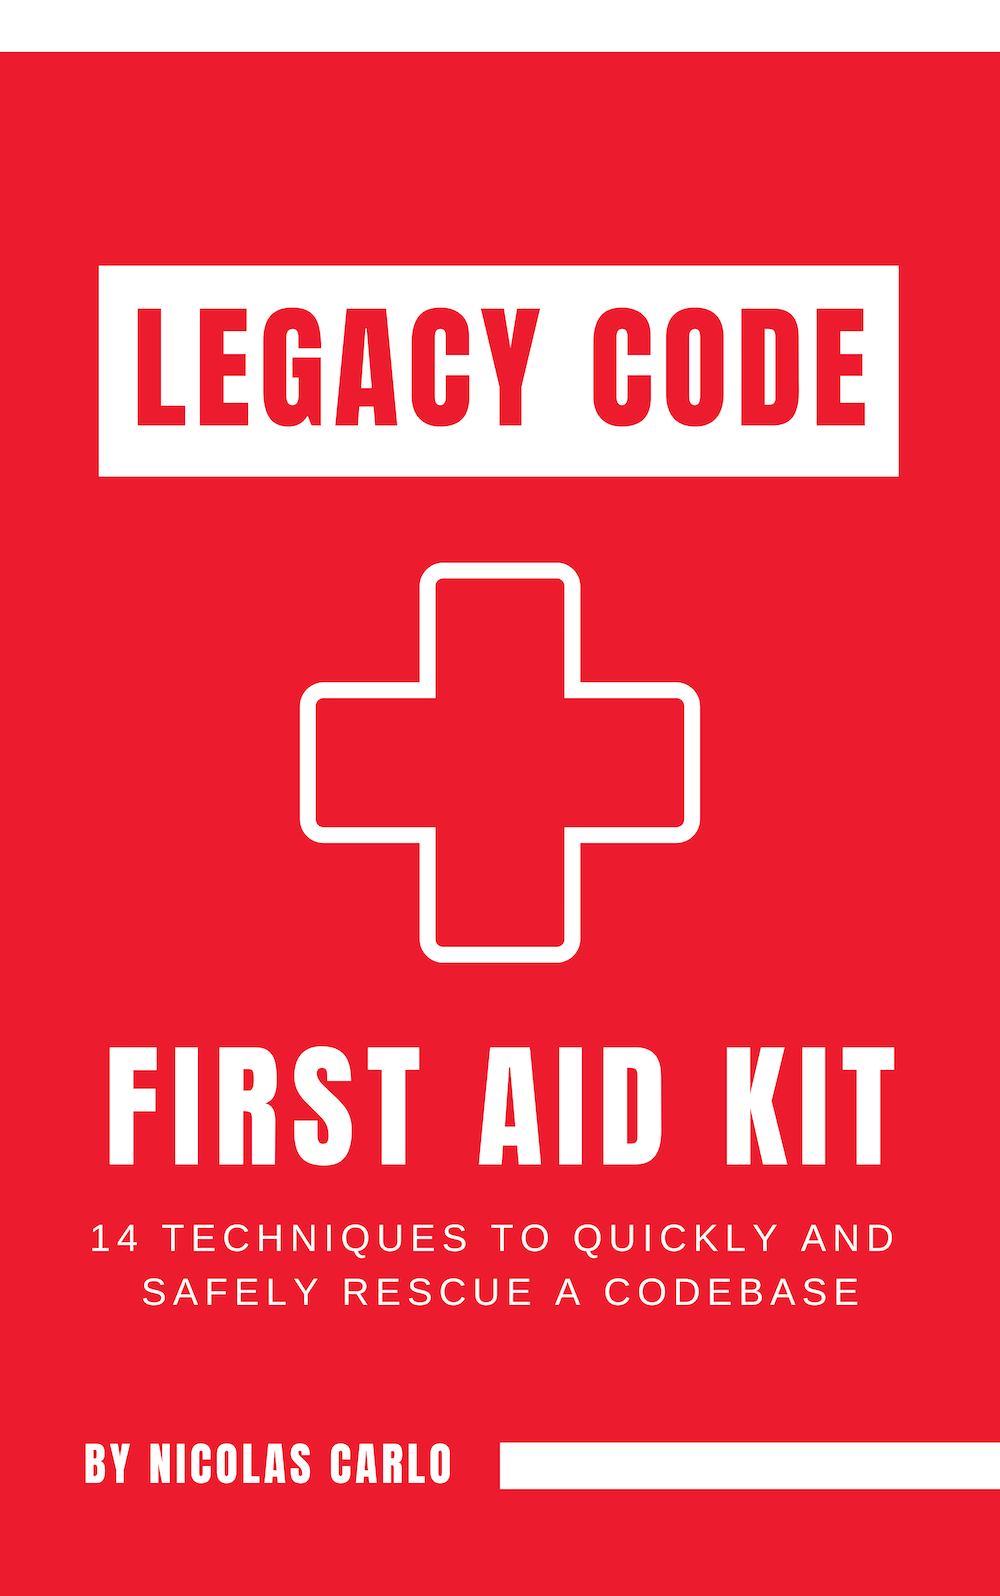 Legacy Code First Aid Kit